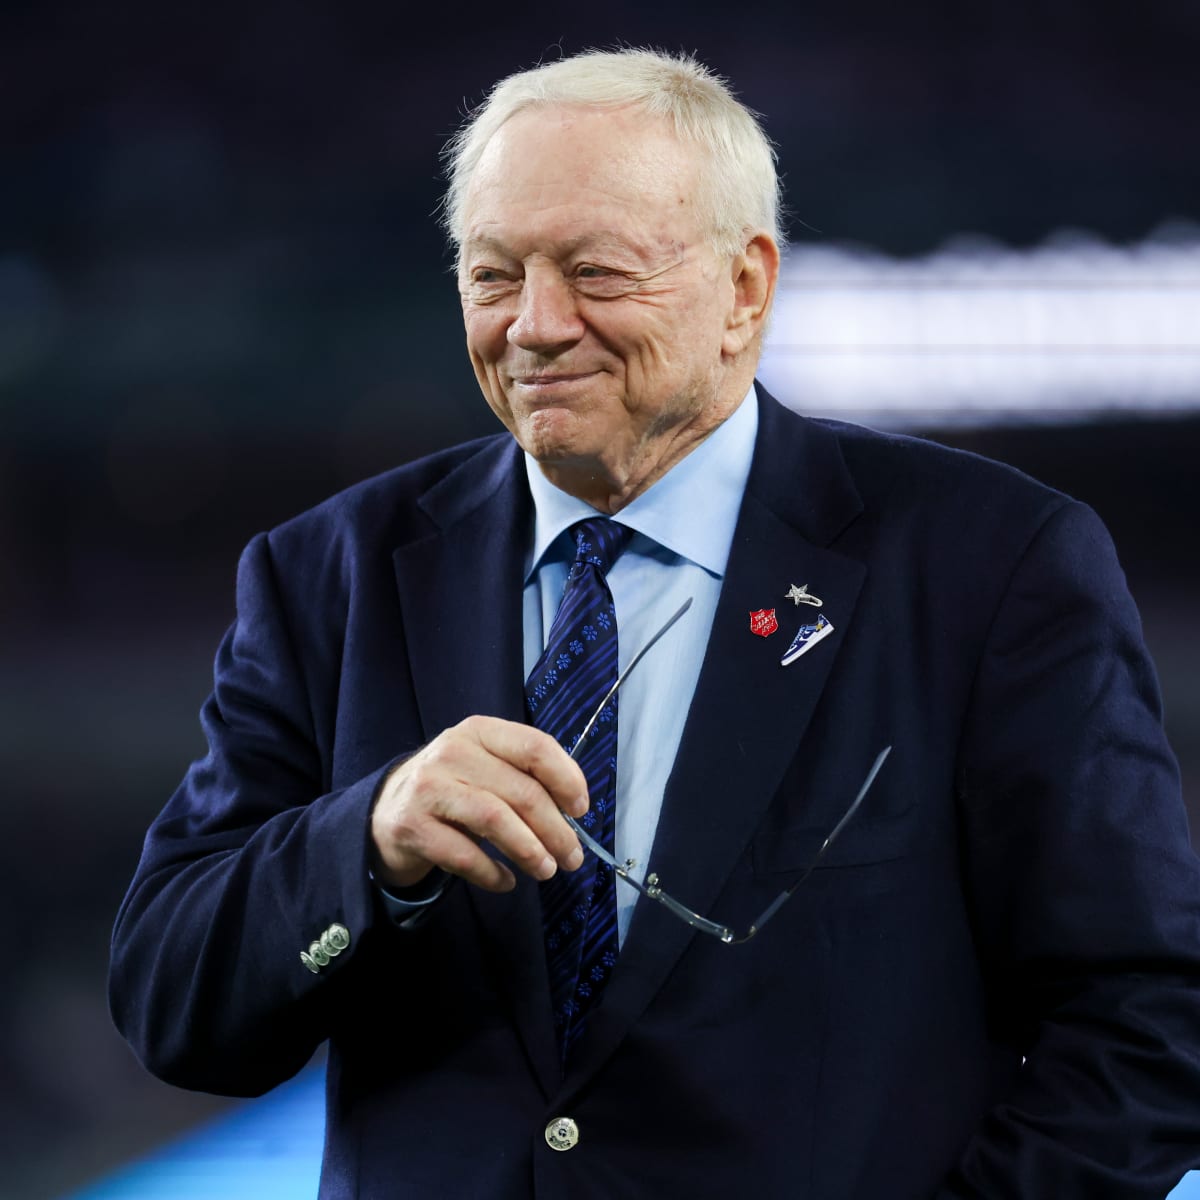 2023 Cowboys Draft: 3 compensatory picks projected for DAL